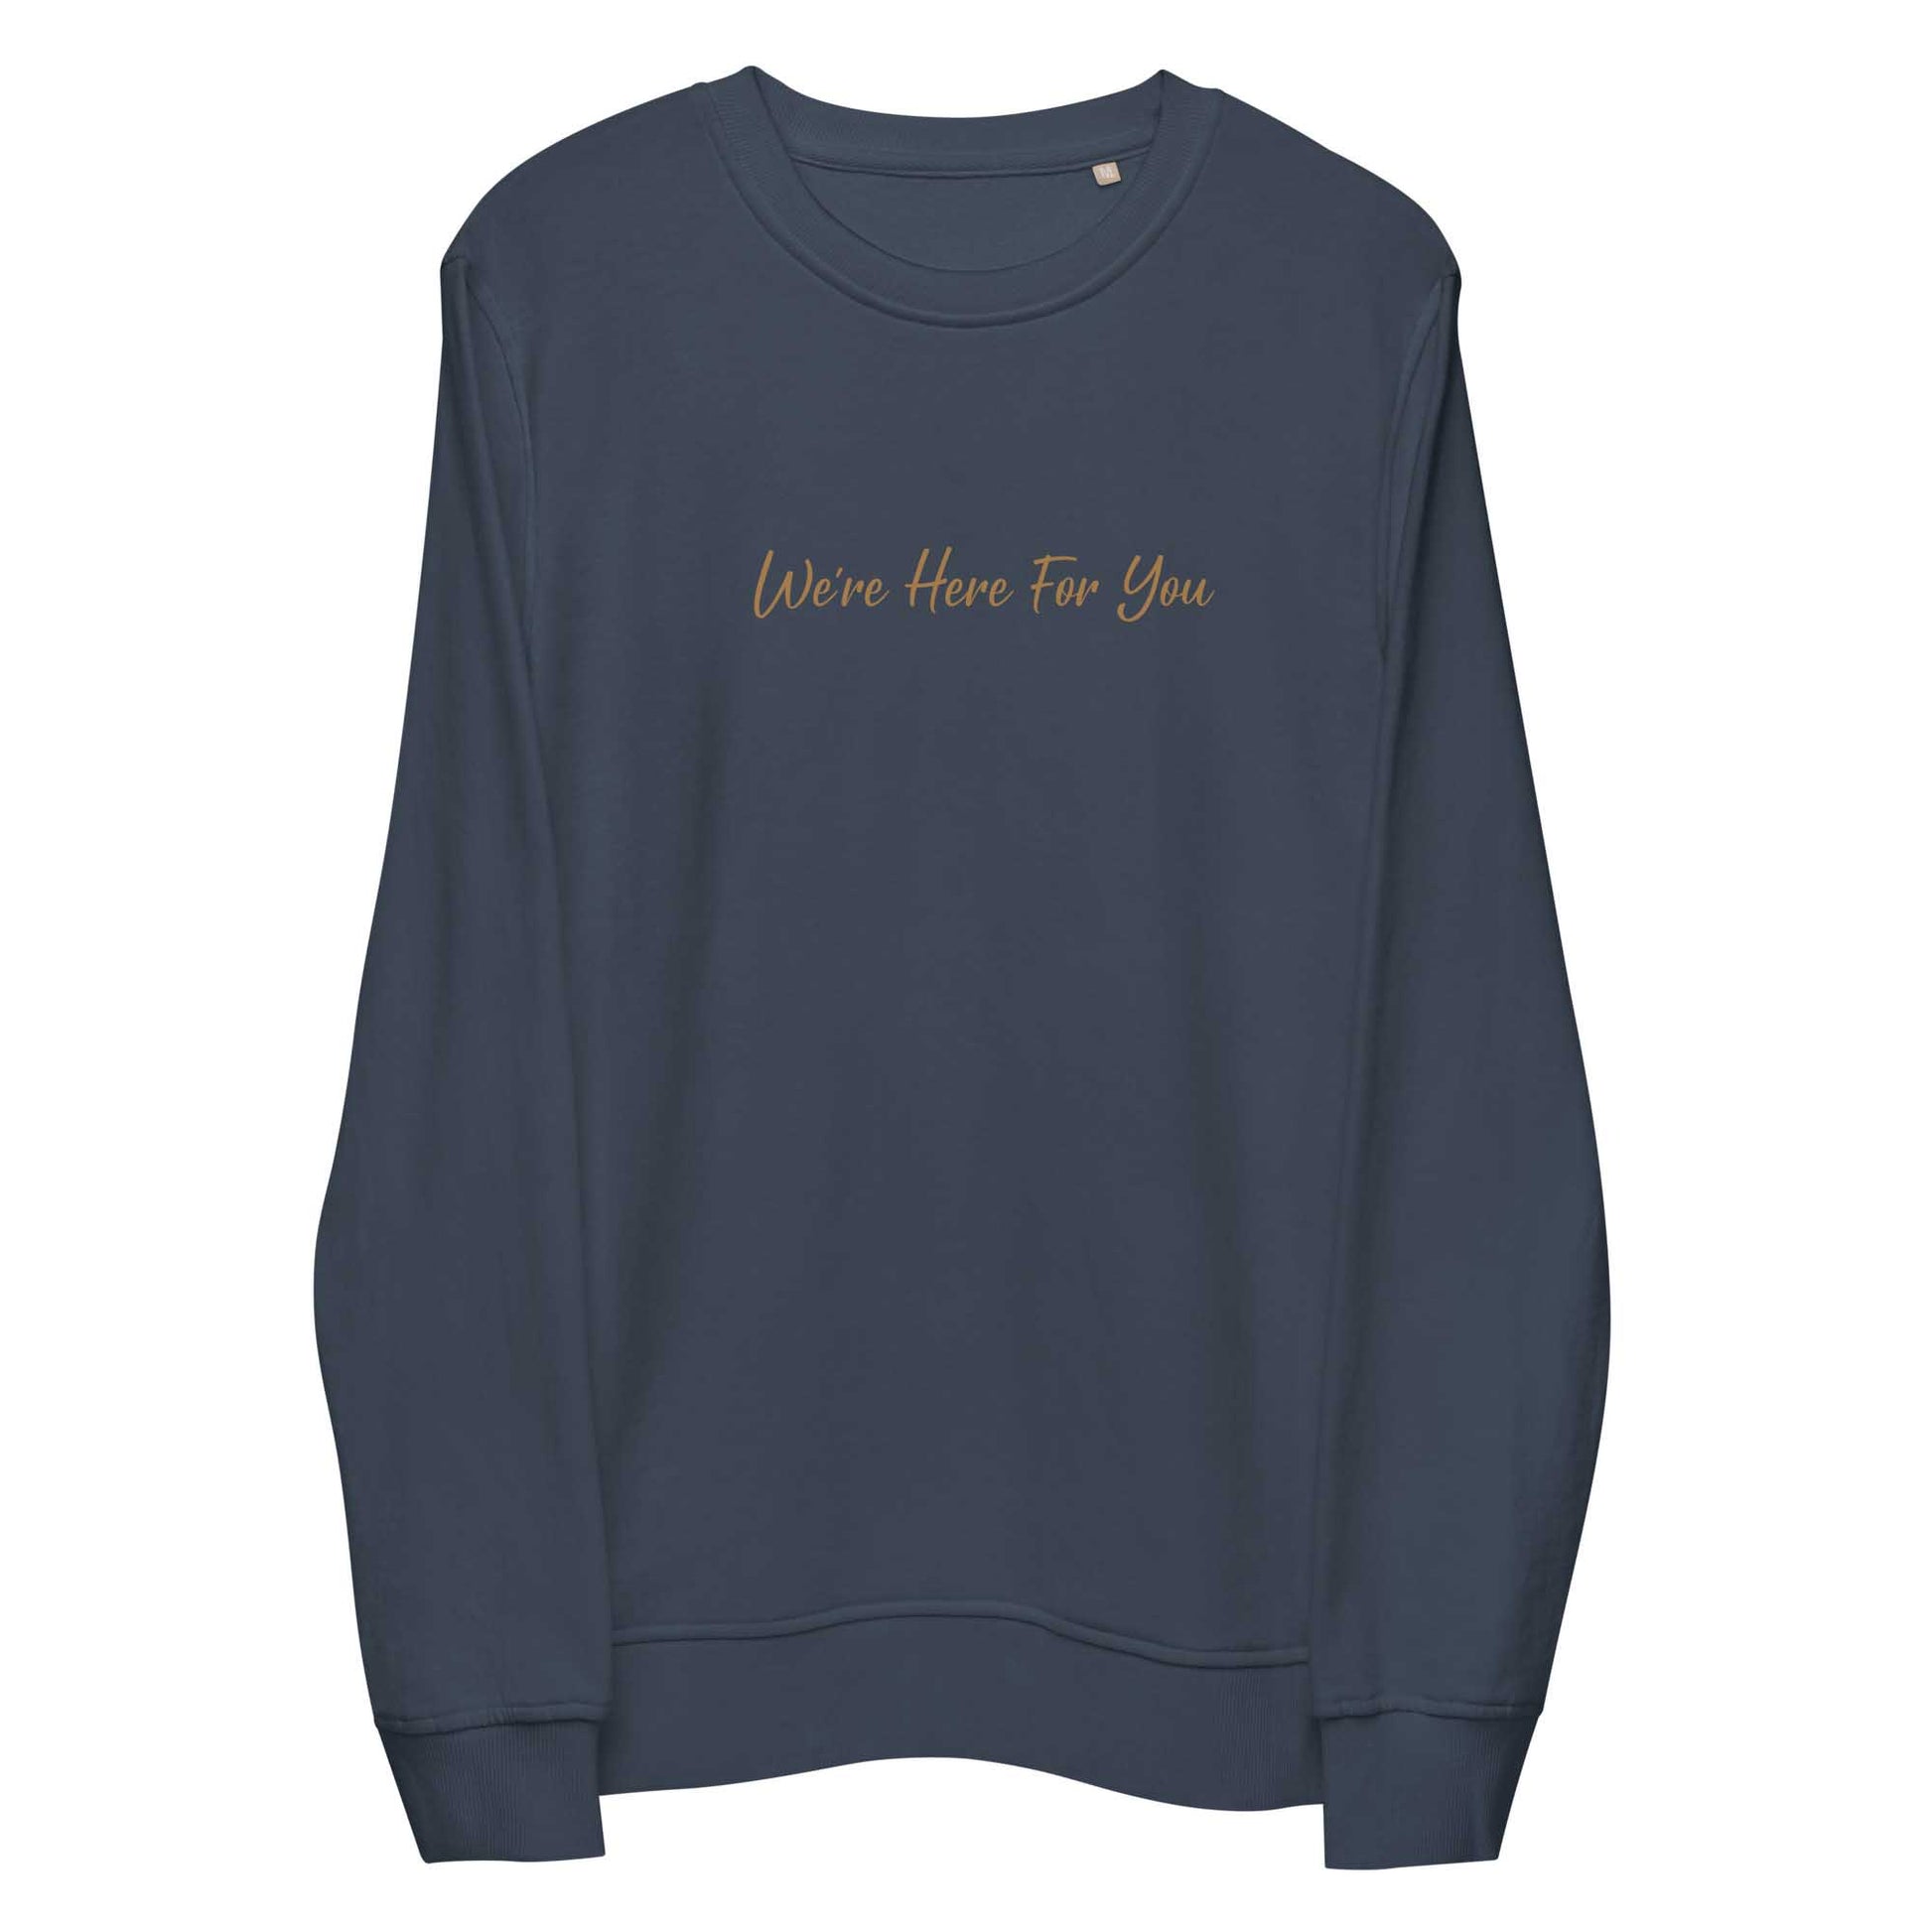 Women navy sustainable sweatshirt with inspirational quote, "We Are Here For You."